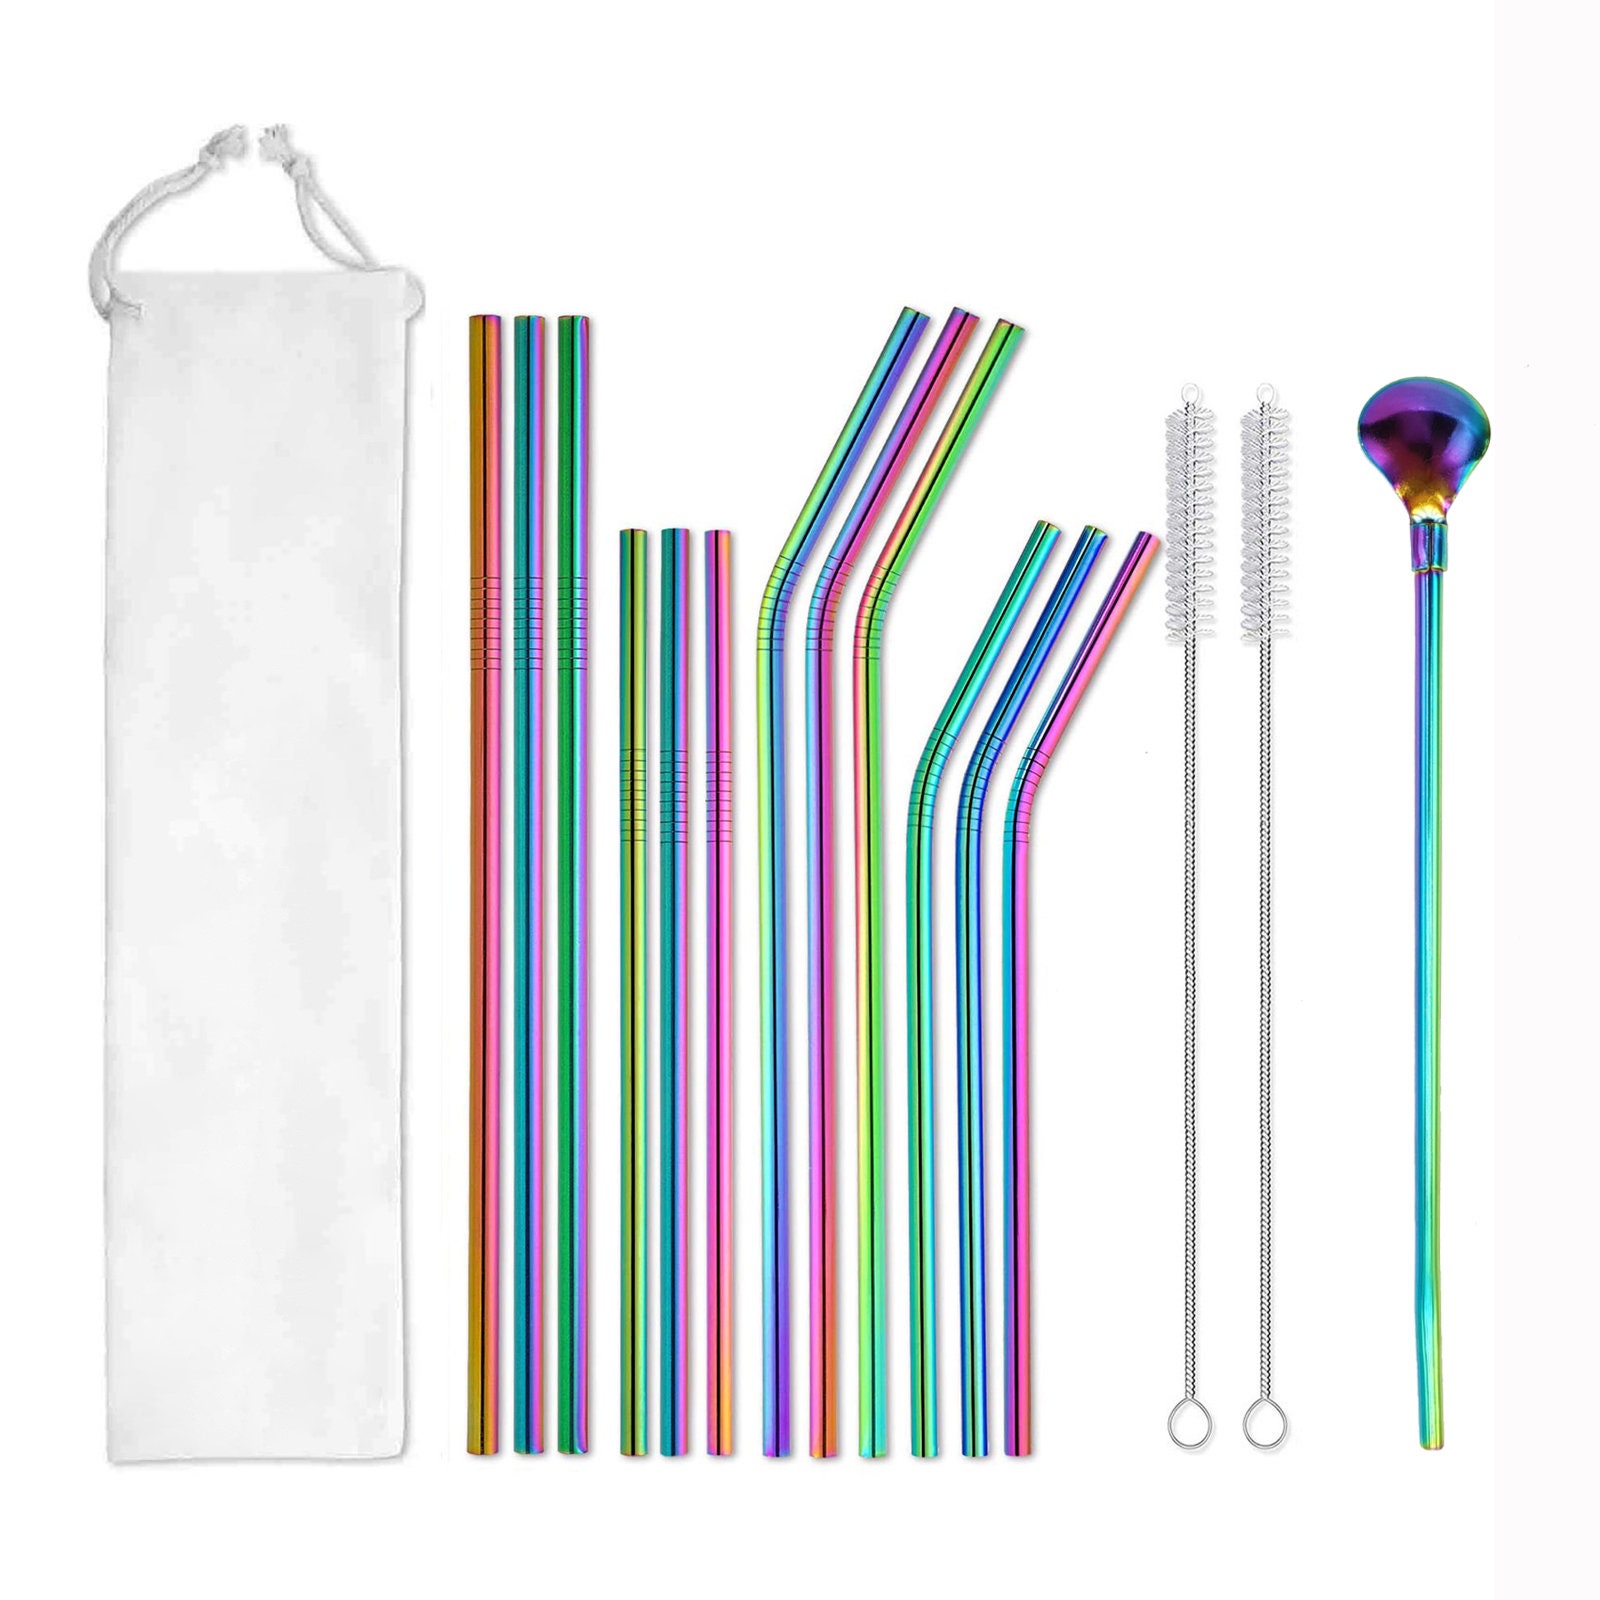 Straw, Reusable Stainless Steel Straws, & Drinking Straws With 16